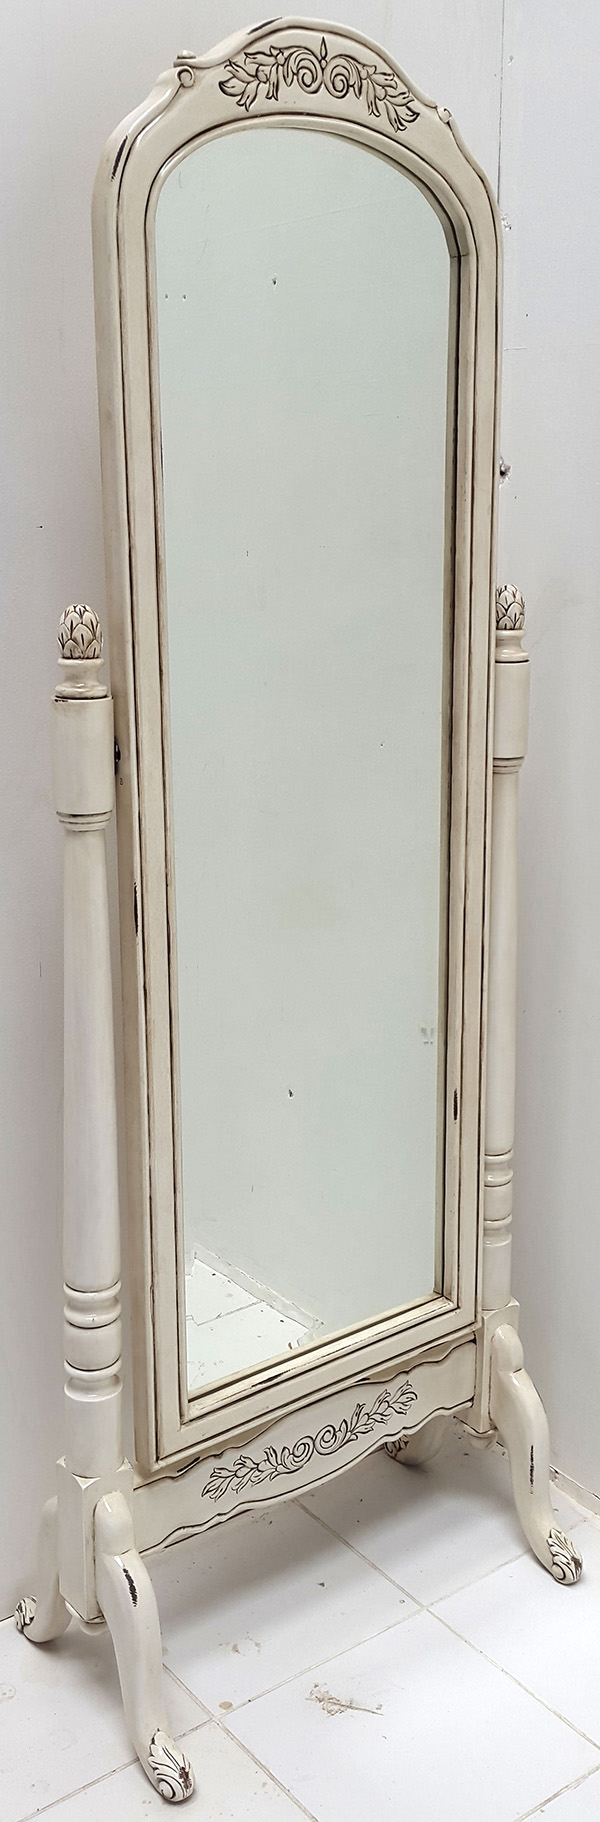 white standing mirror with carved ornements